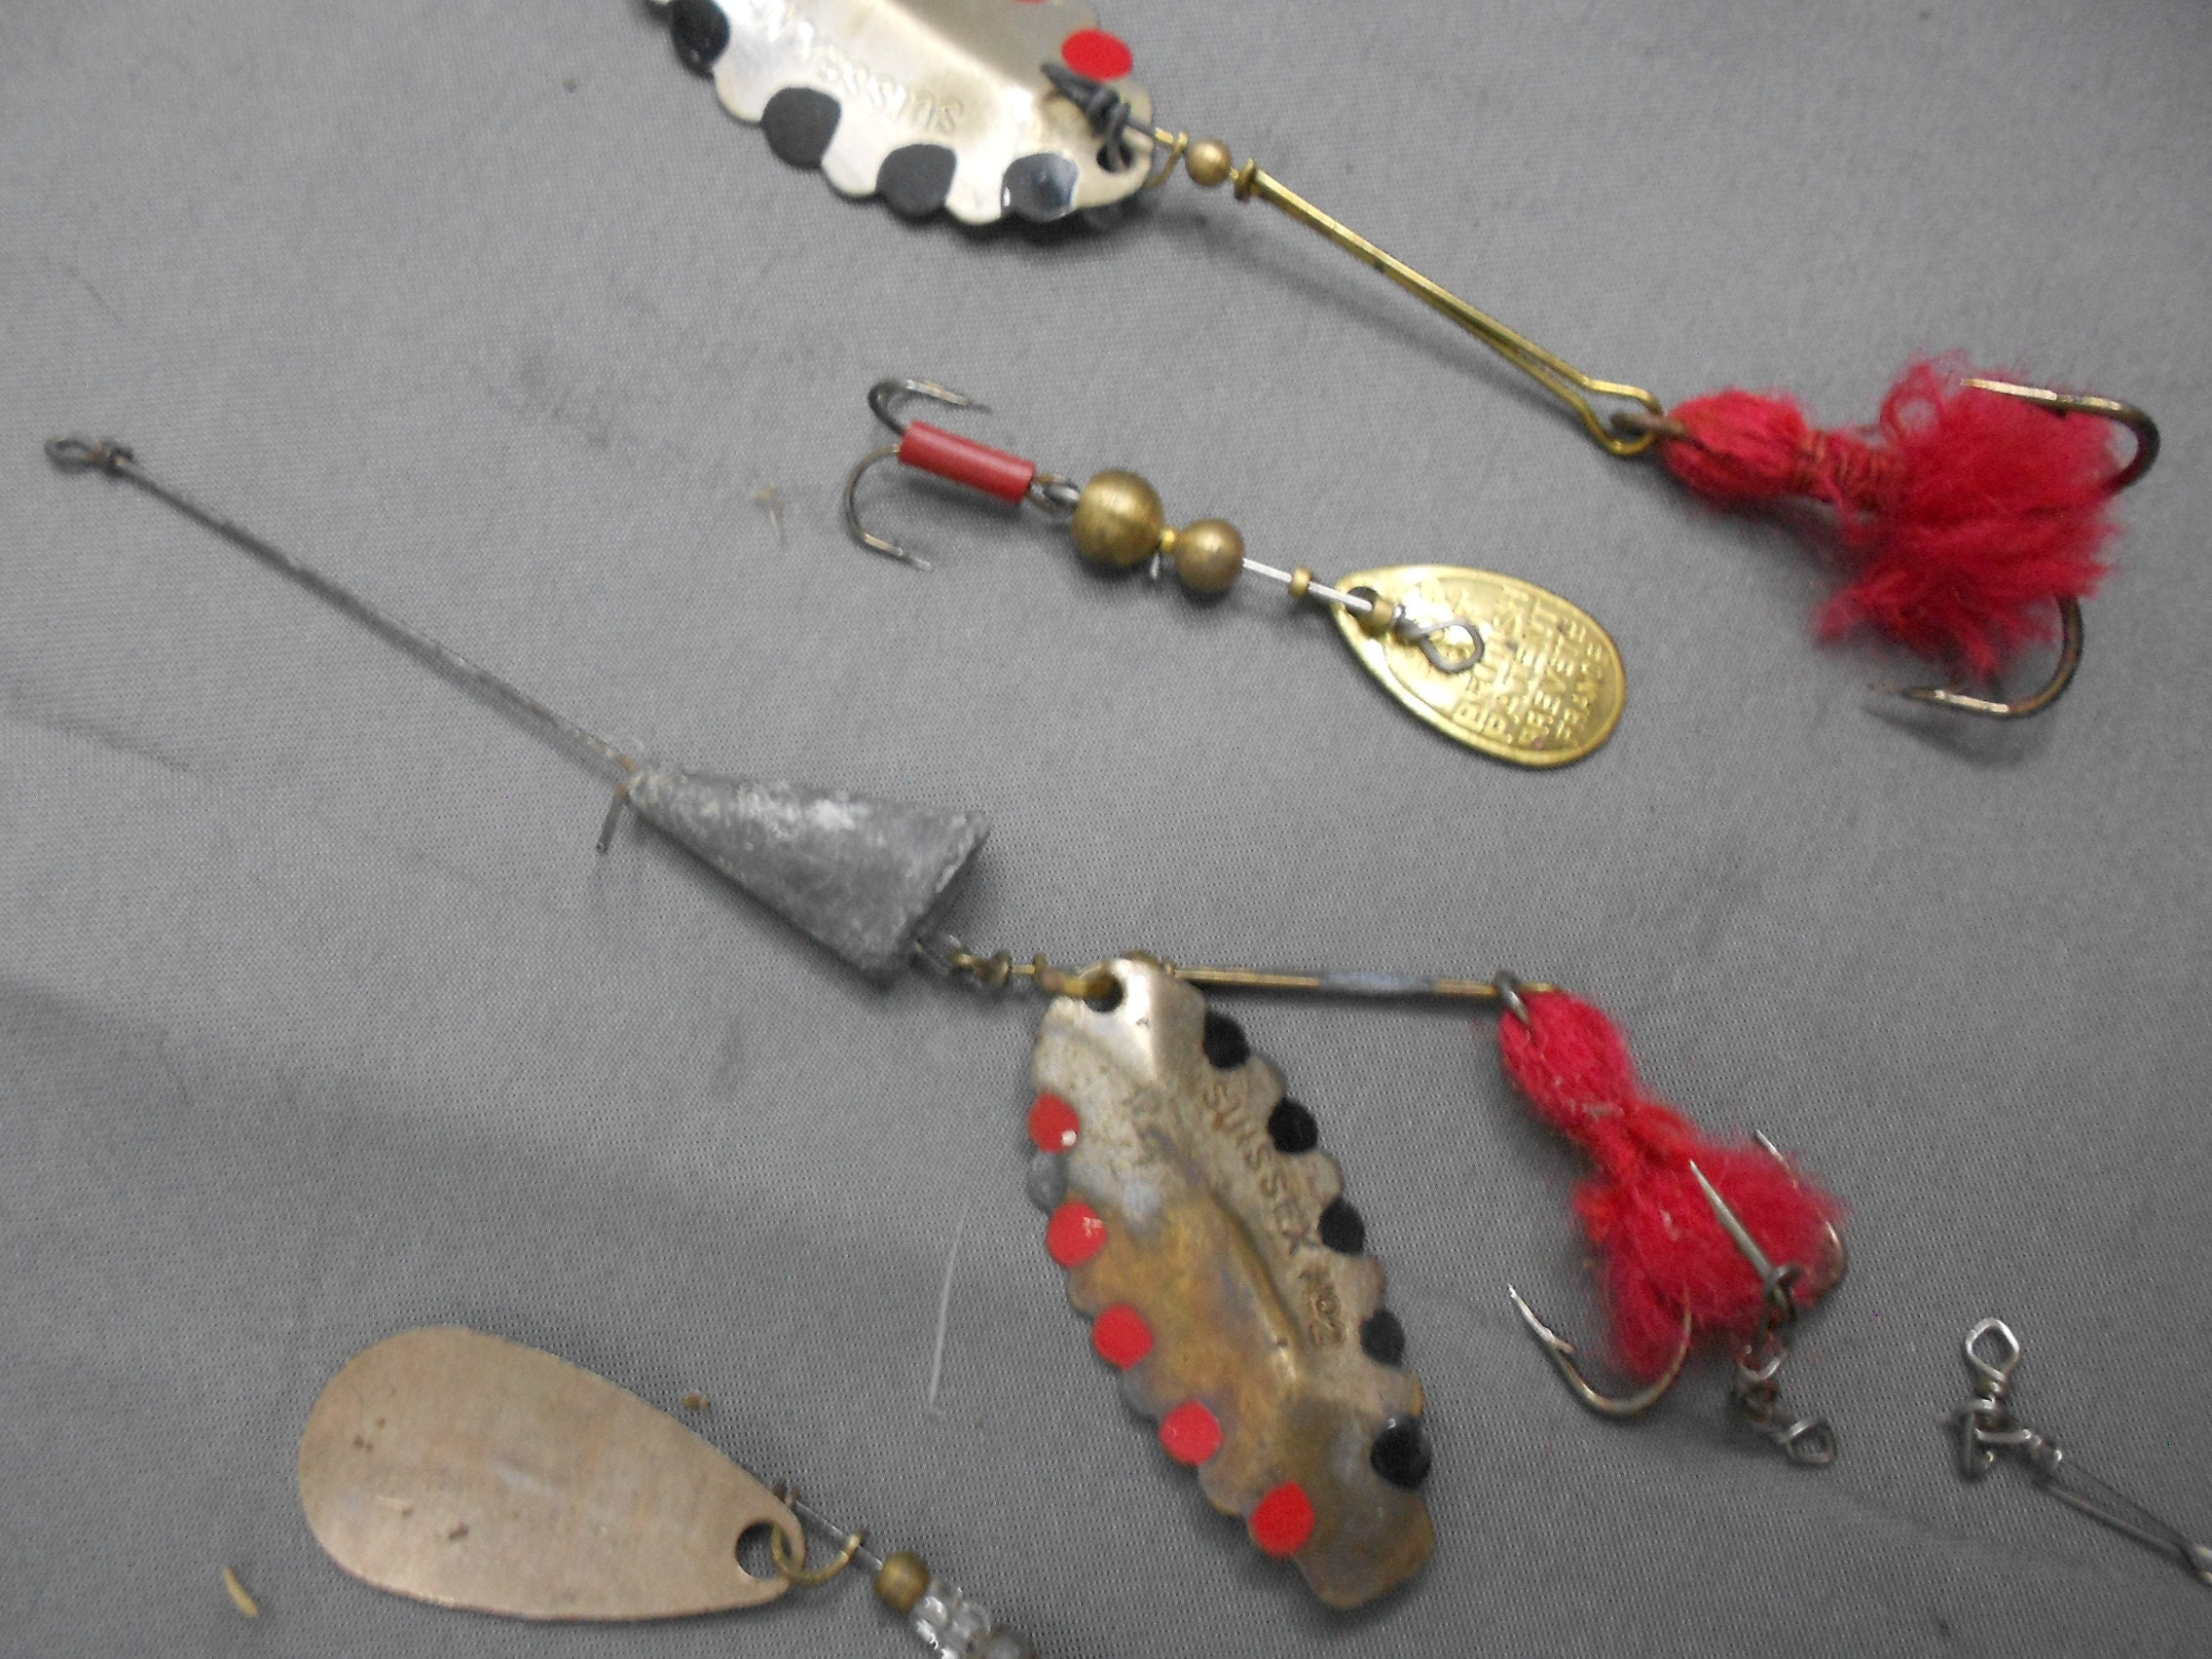 Lot of 5 Lures Spinners Etc Vintage Antique Angling Spinner